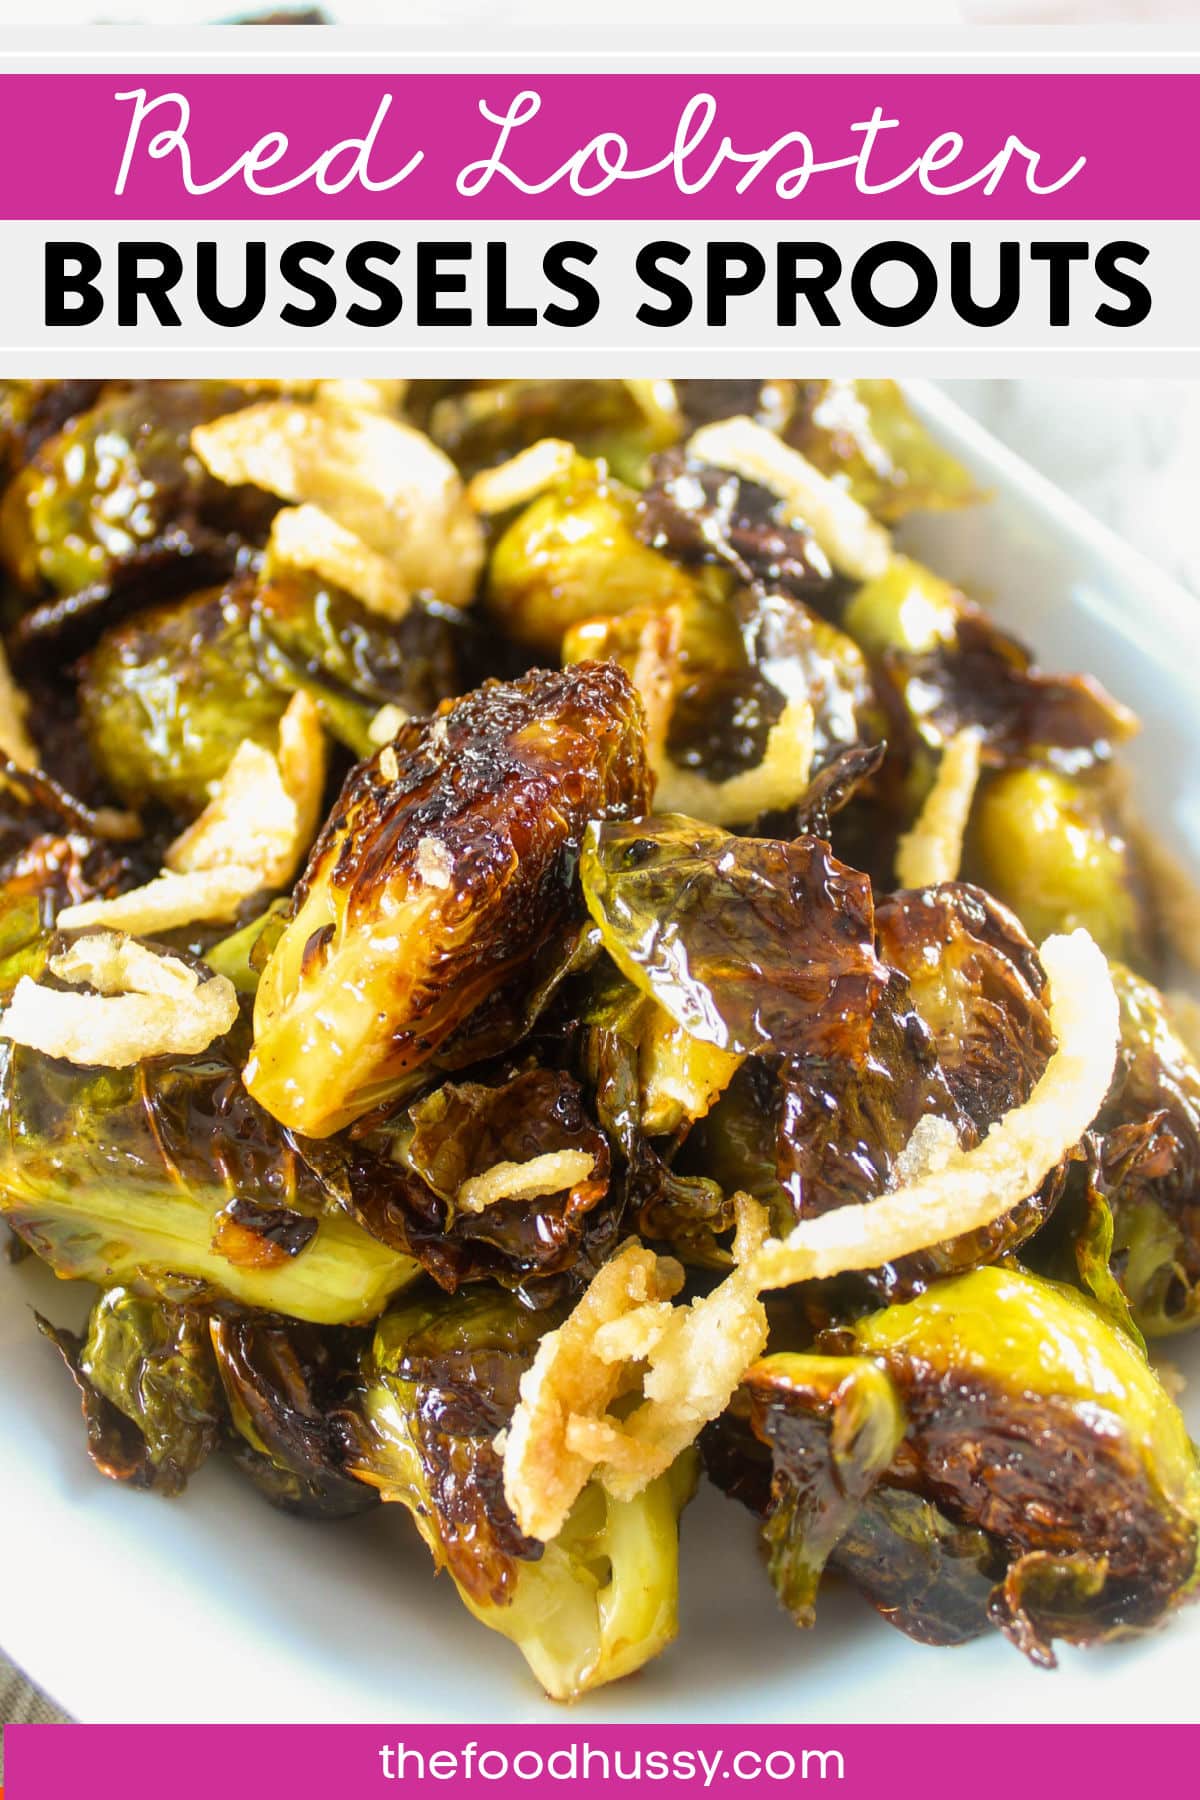 This copycat recipe for Red Lobster Crispy Brussels Sprouts will quickly become a favorite side dish for your family! Crispy roasted Brussels sprouts tossed in a sweet soy-ginger glaze.  via @foodhussy